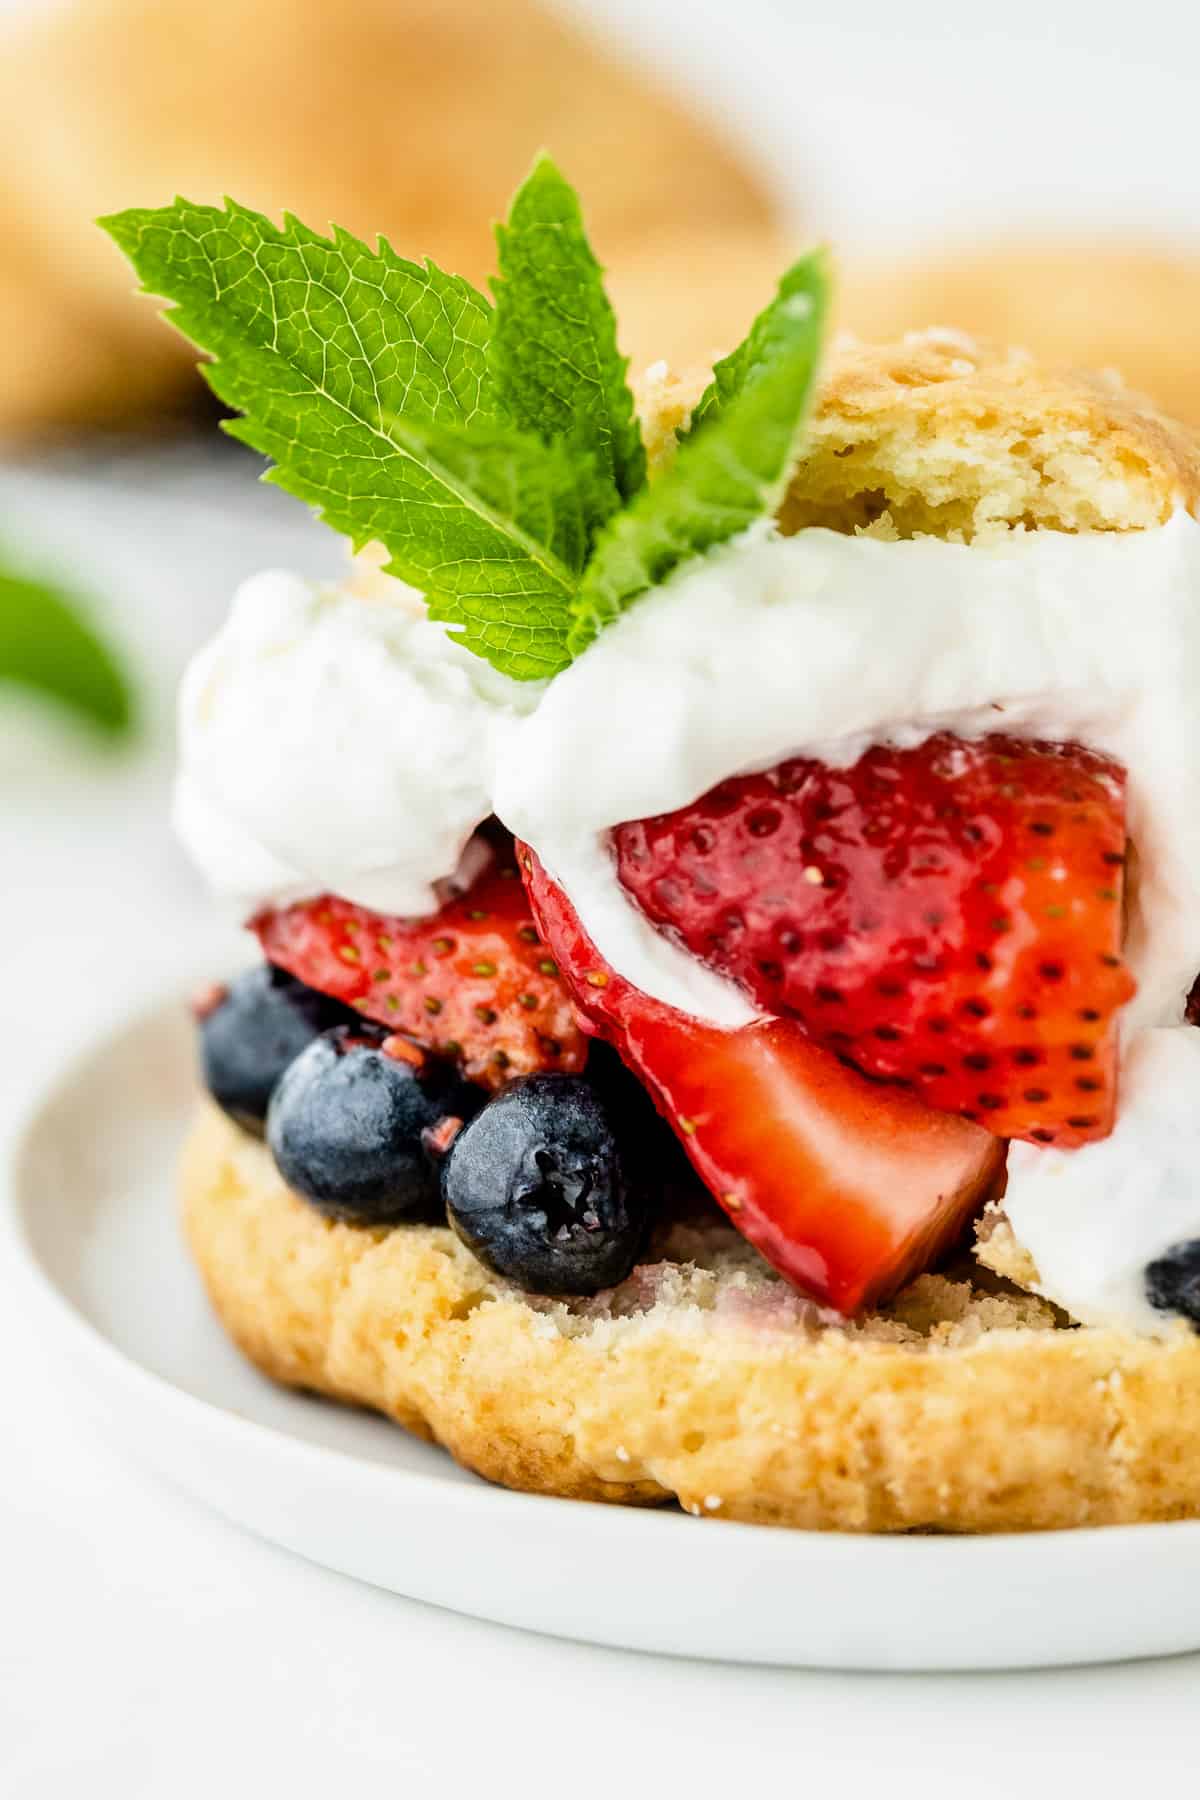 A closeup of a shortcake stuffed with strawberries, raspberries, blueberries and whipped cream on a white plate.